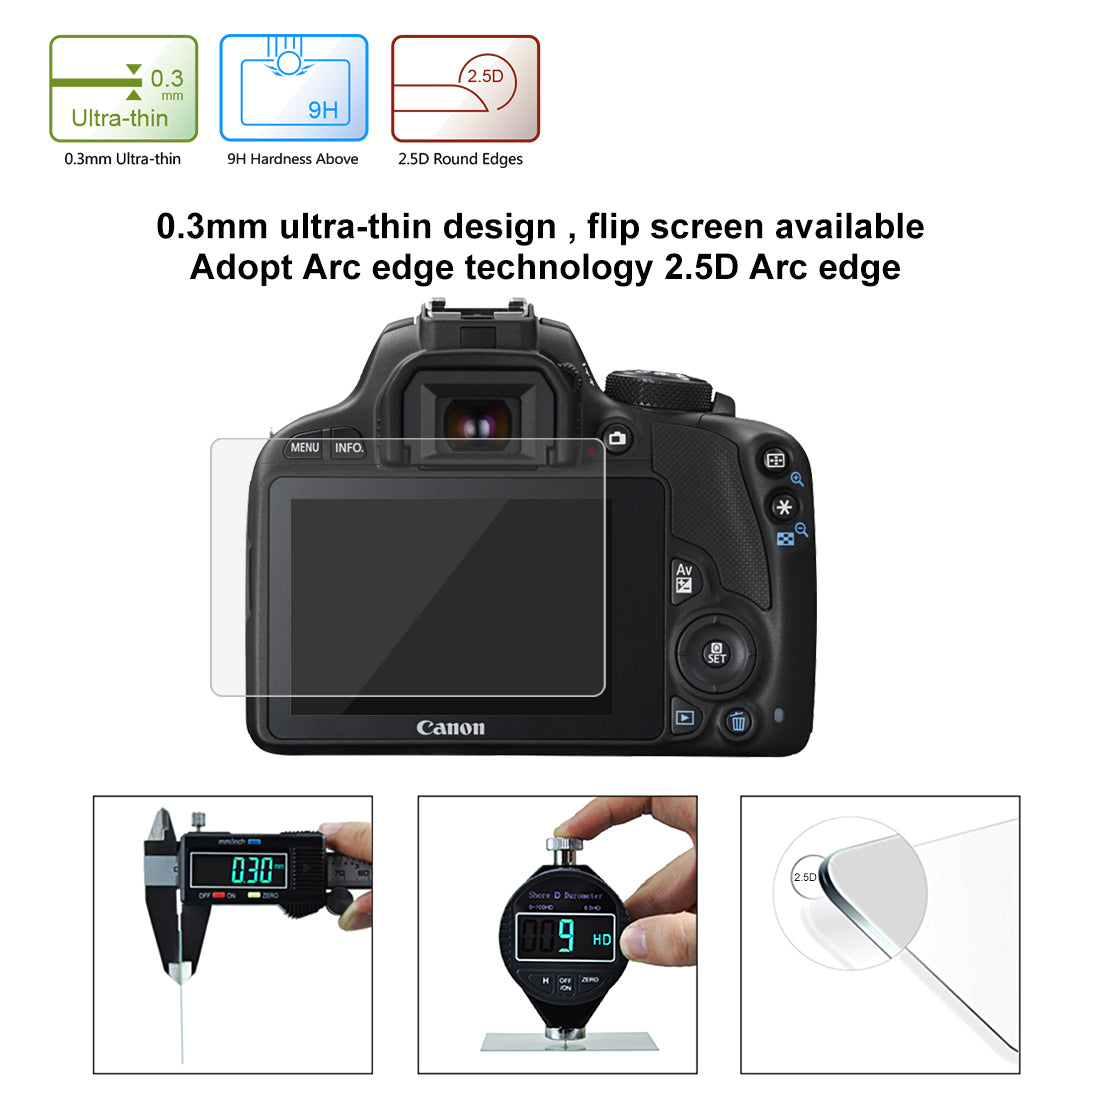 Puluz PU5505 SLR Camera Tempered Glass Screen Protector for Canon 100D / M3